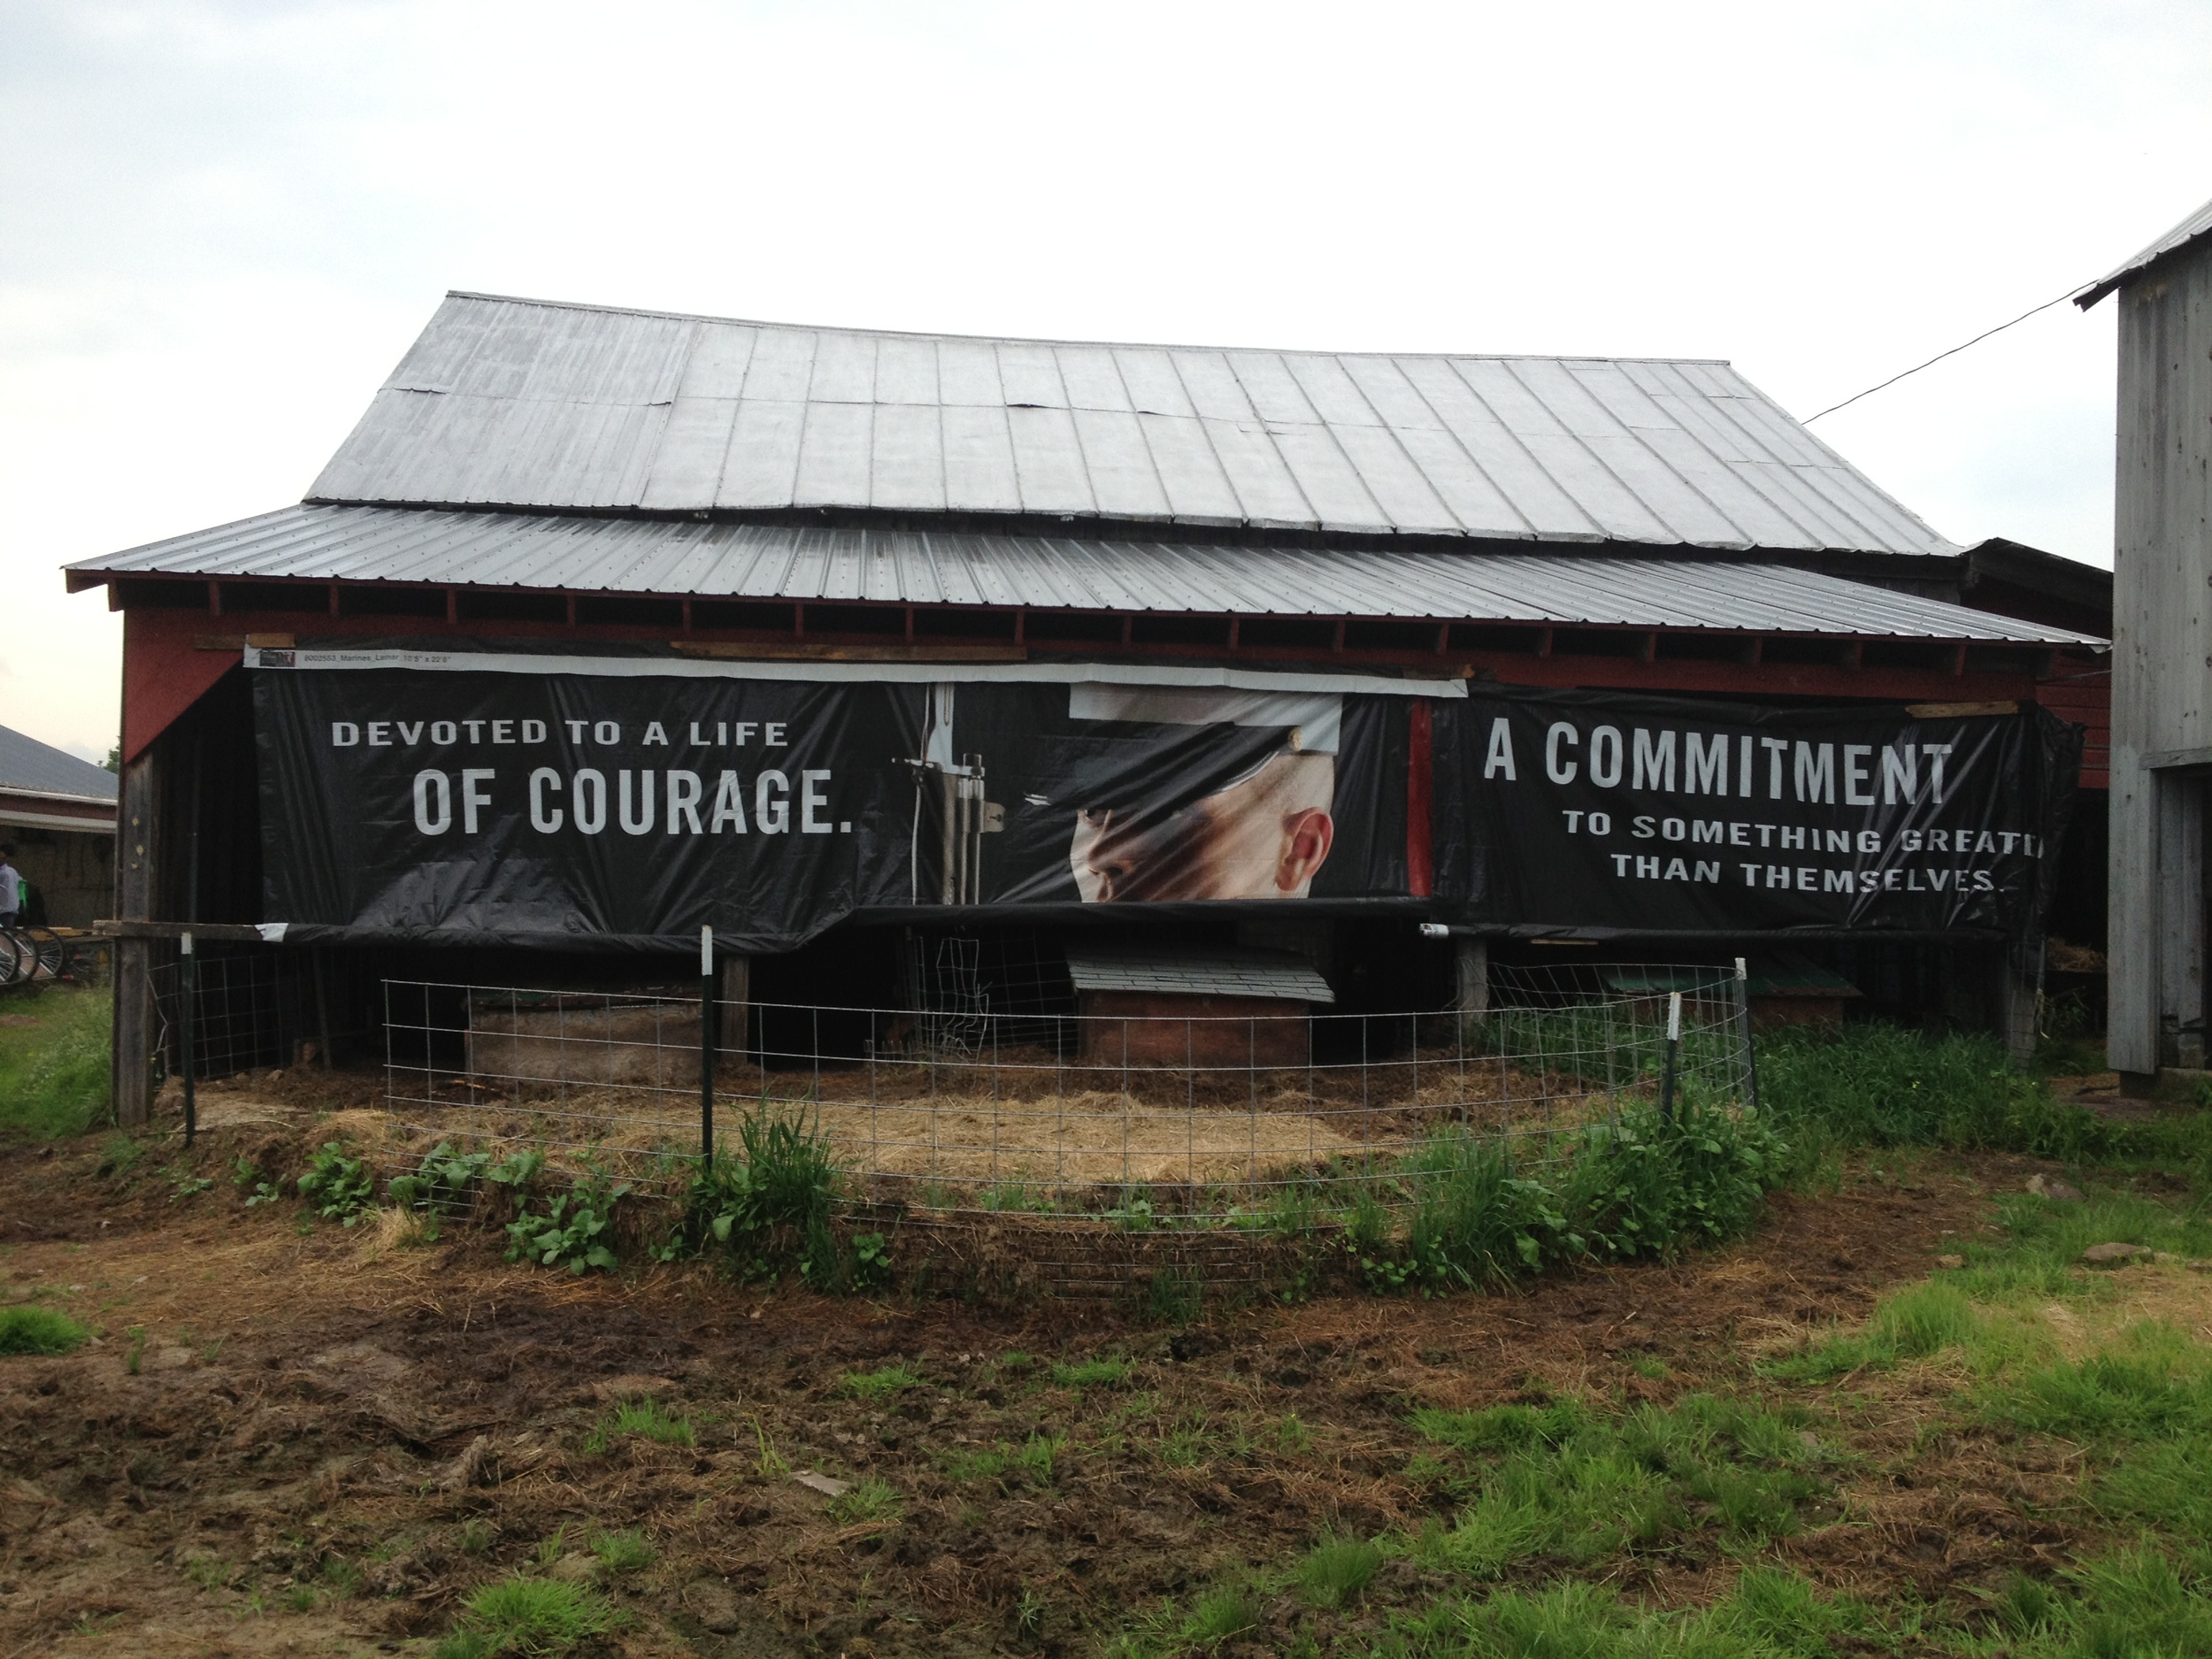  Another great example of creative recycling - a vinyl Marines banner provides some extra cover on an open-sided barn. 